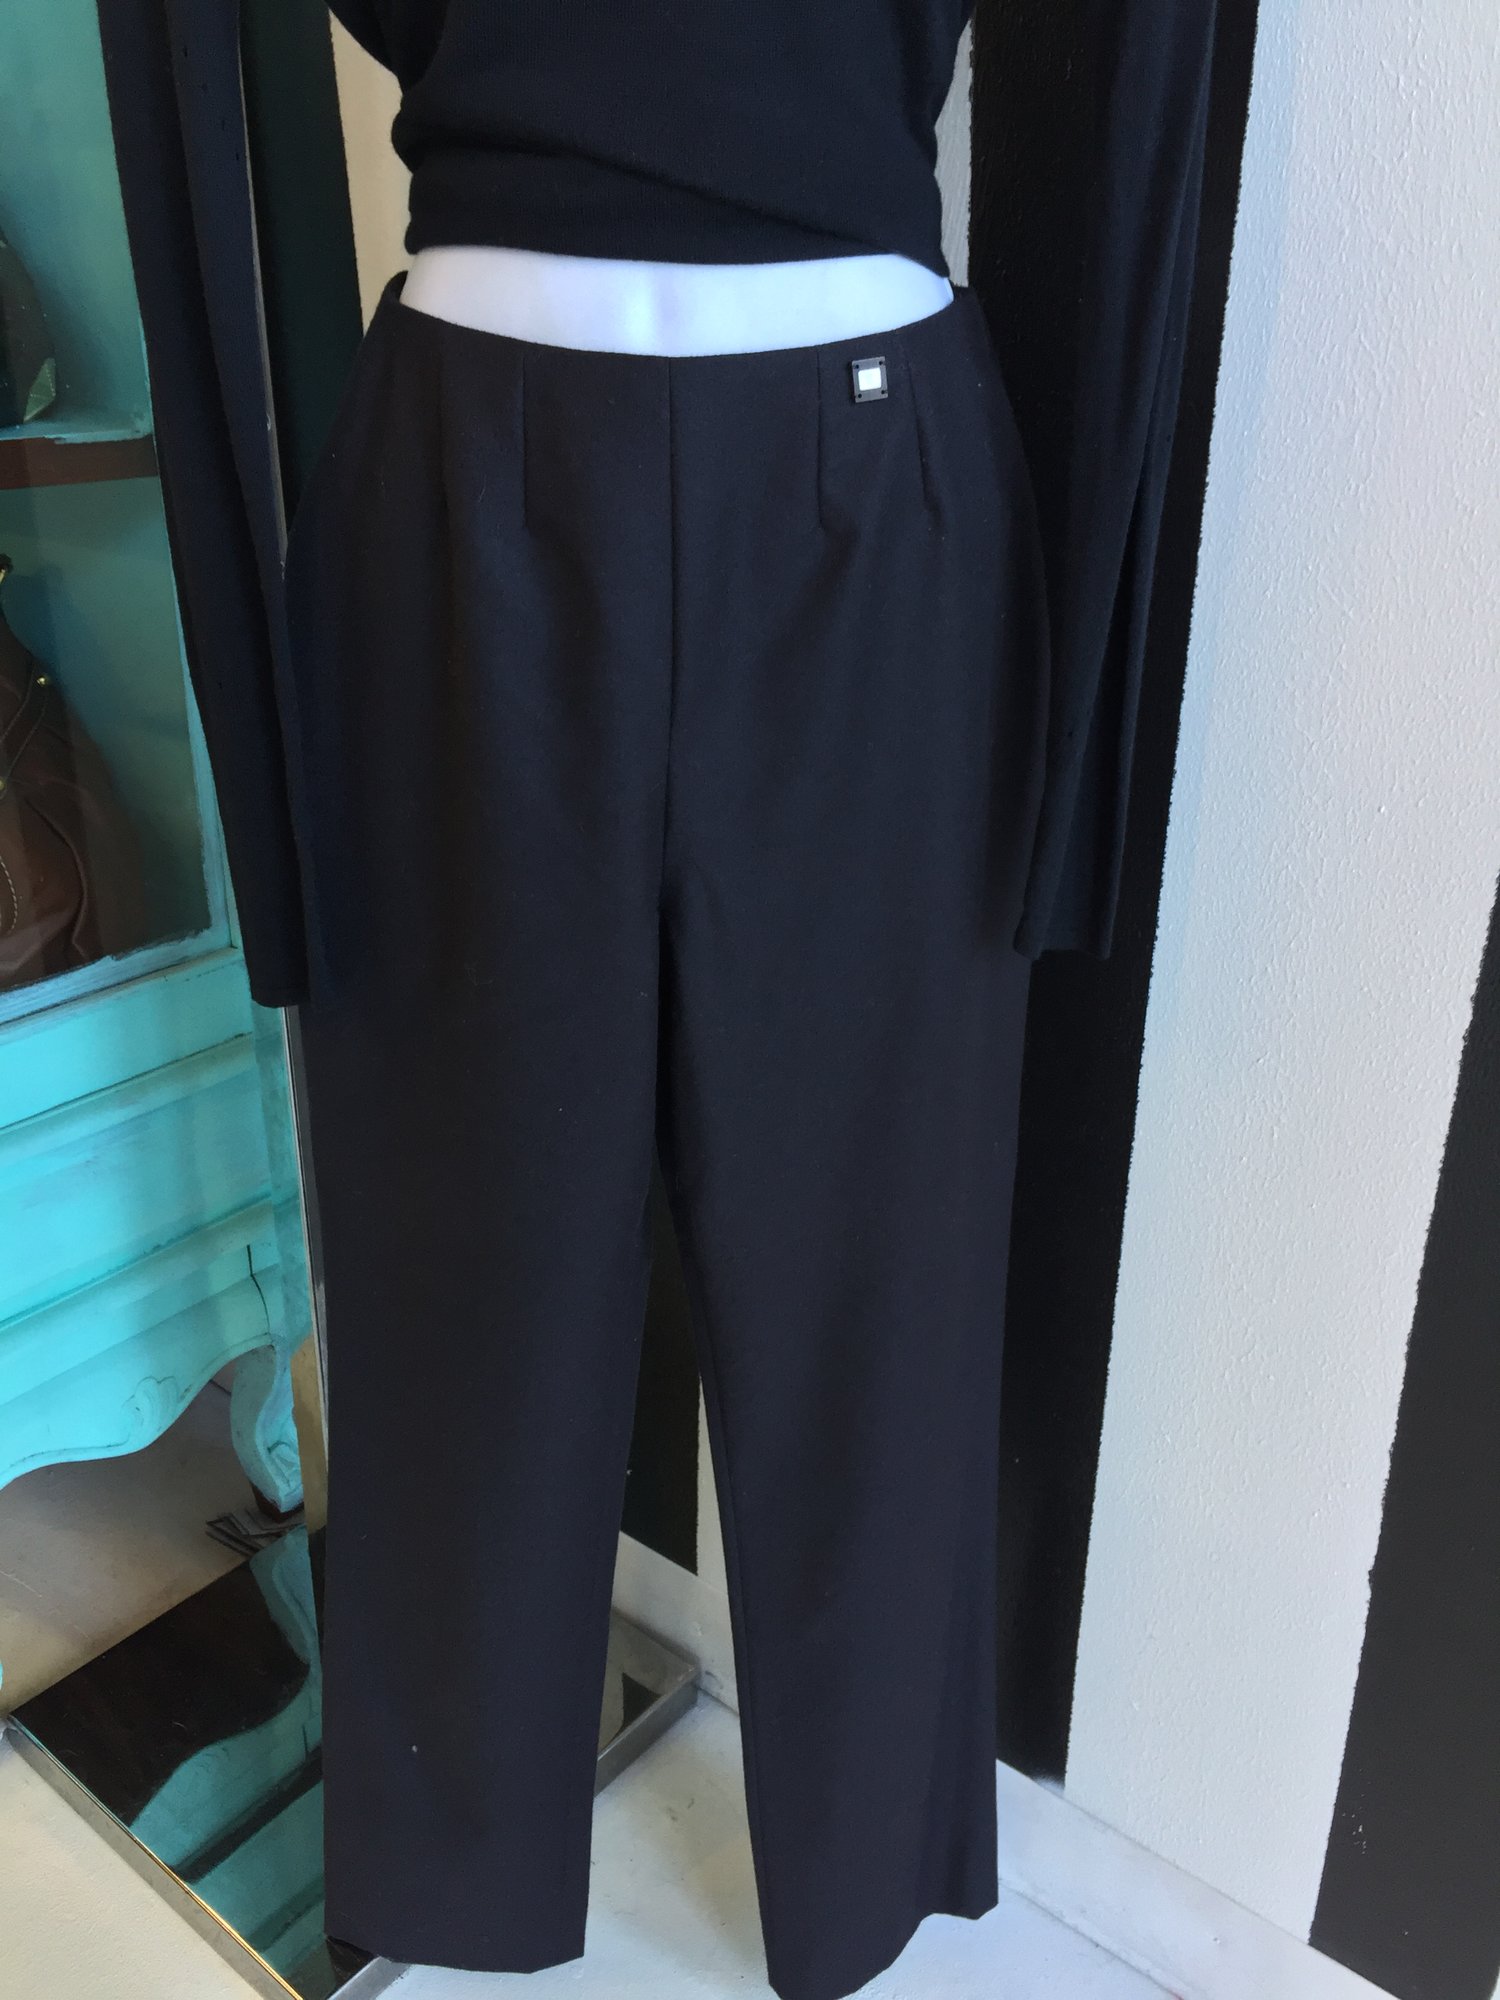 Black Chanel dress pants, gently used, size 4. Retail: $1,200